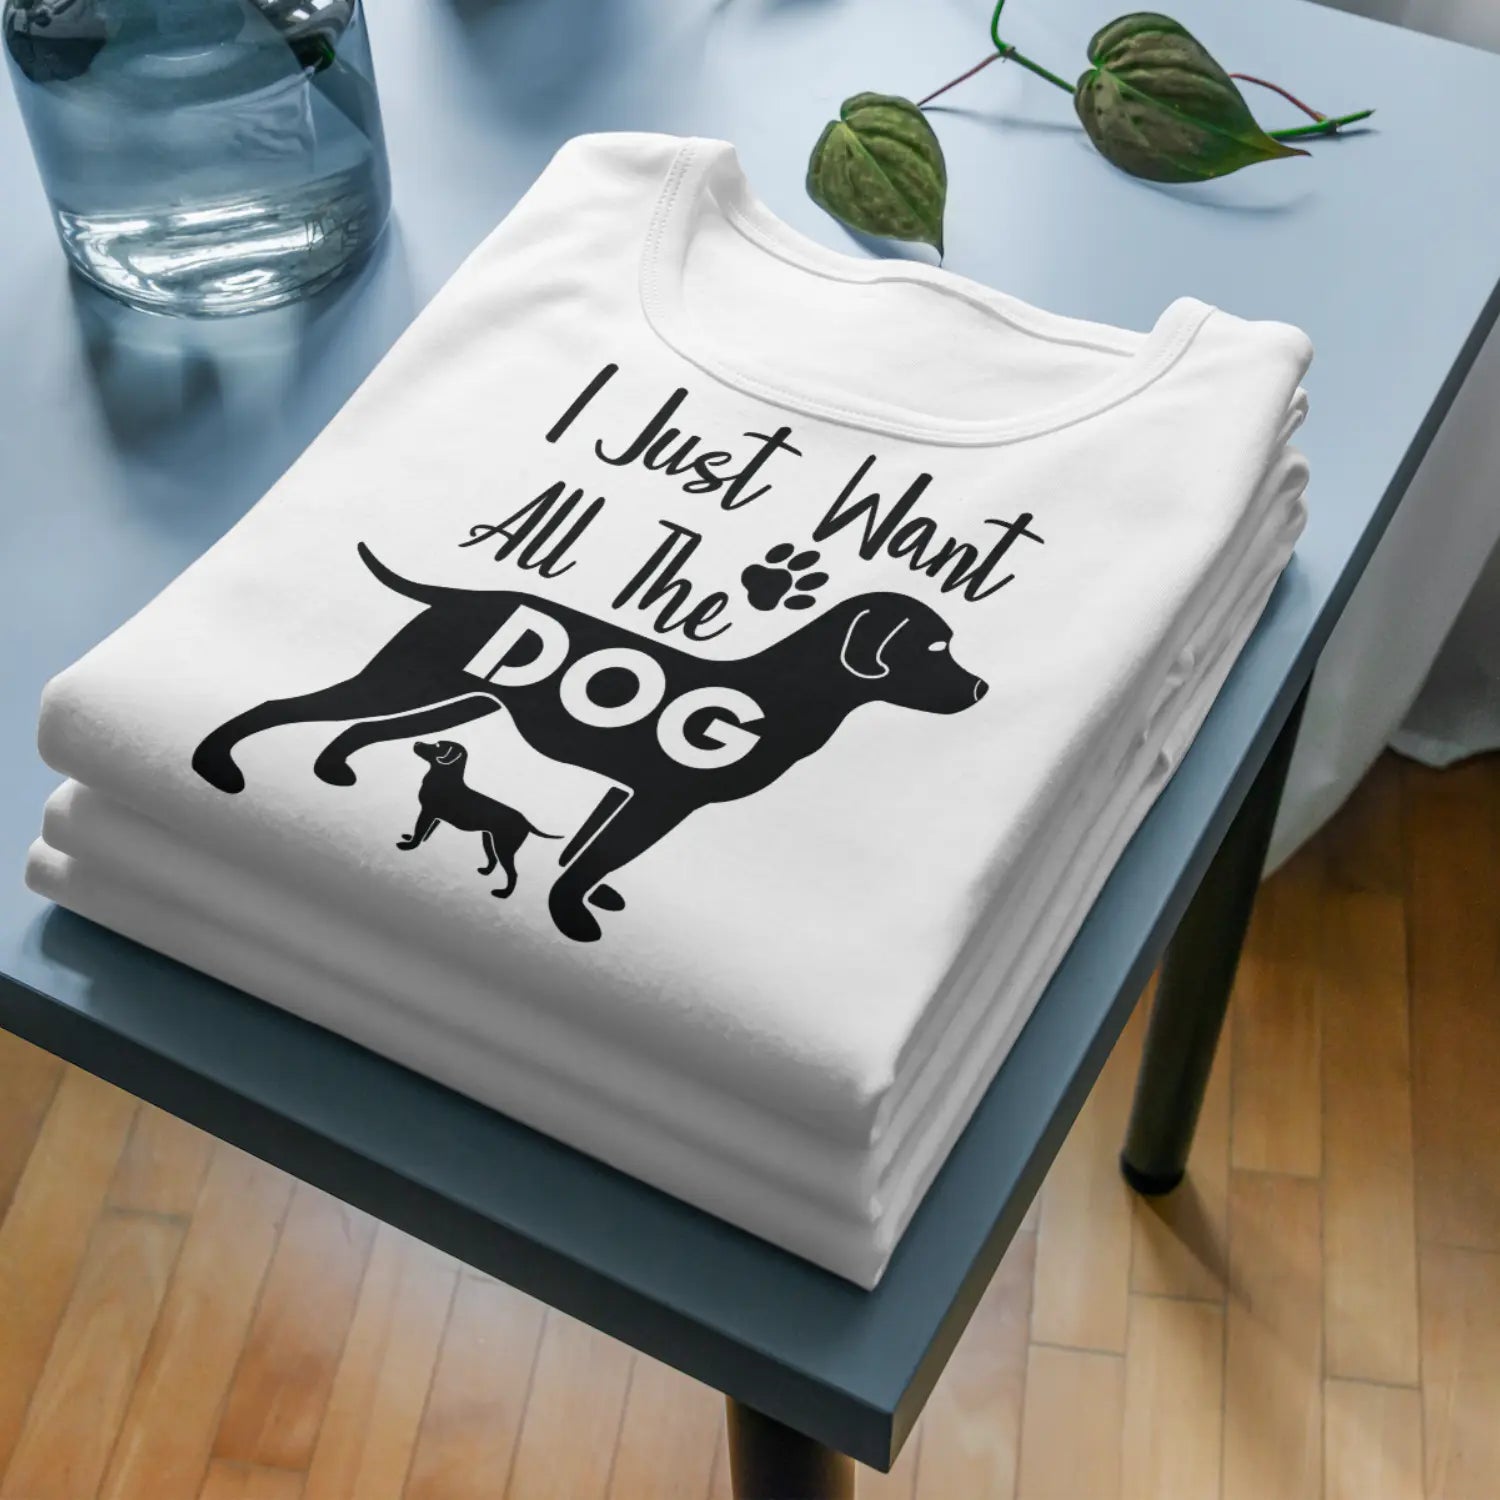 I Just Want All The Dog SVG | Digital Download | Cut File | SVG Only The Sweet Stuff